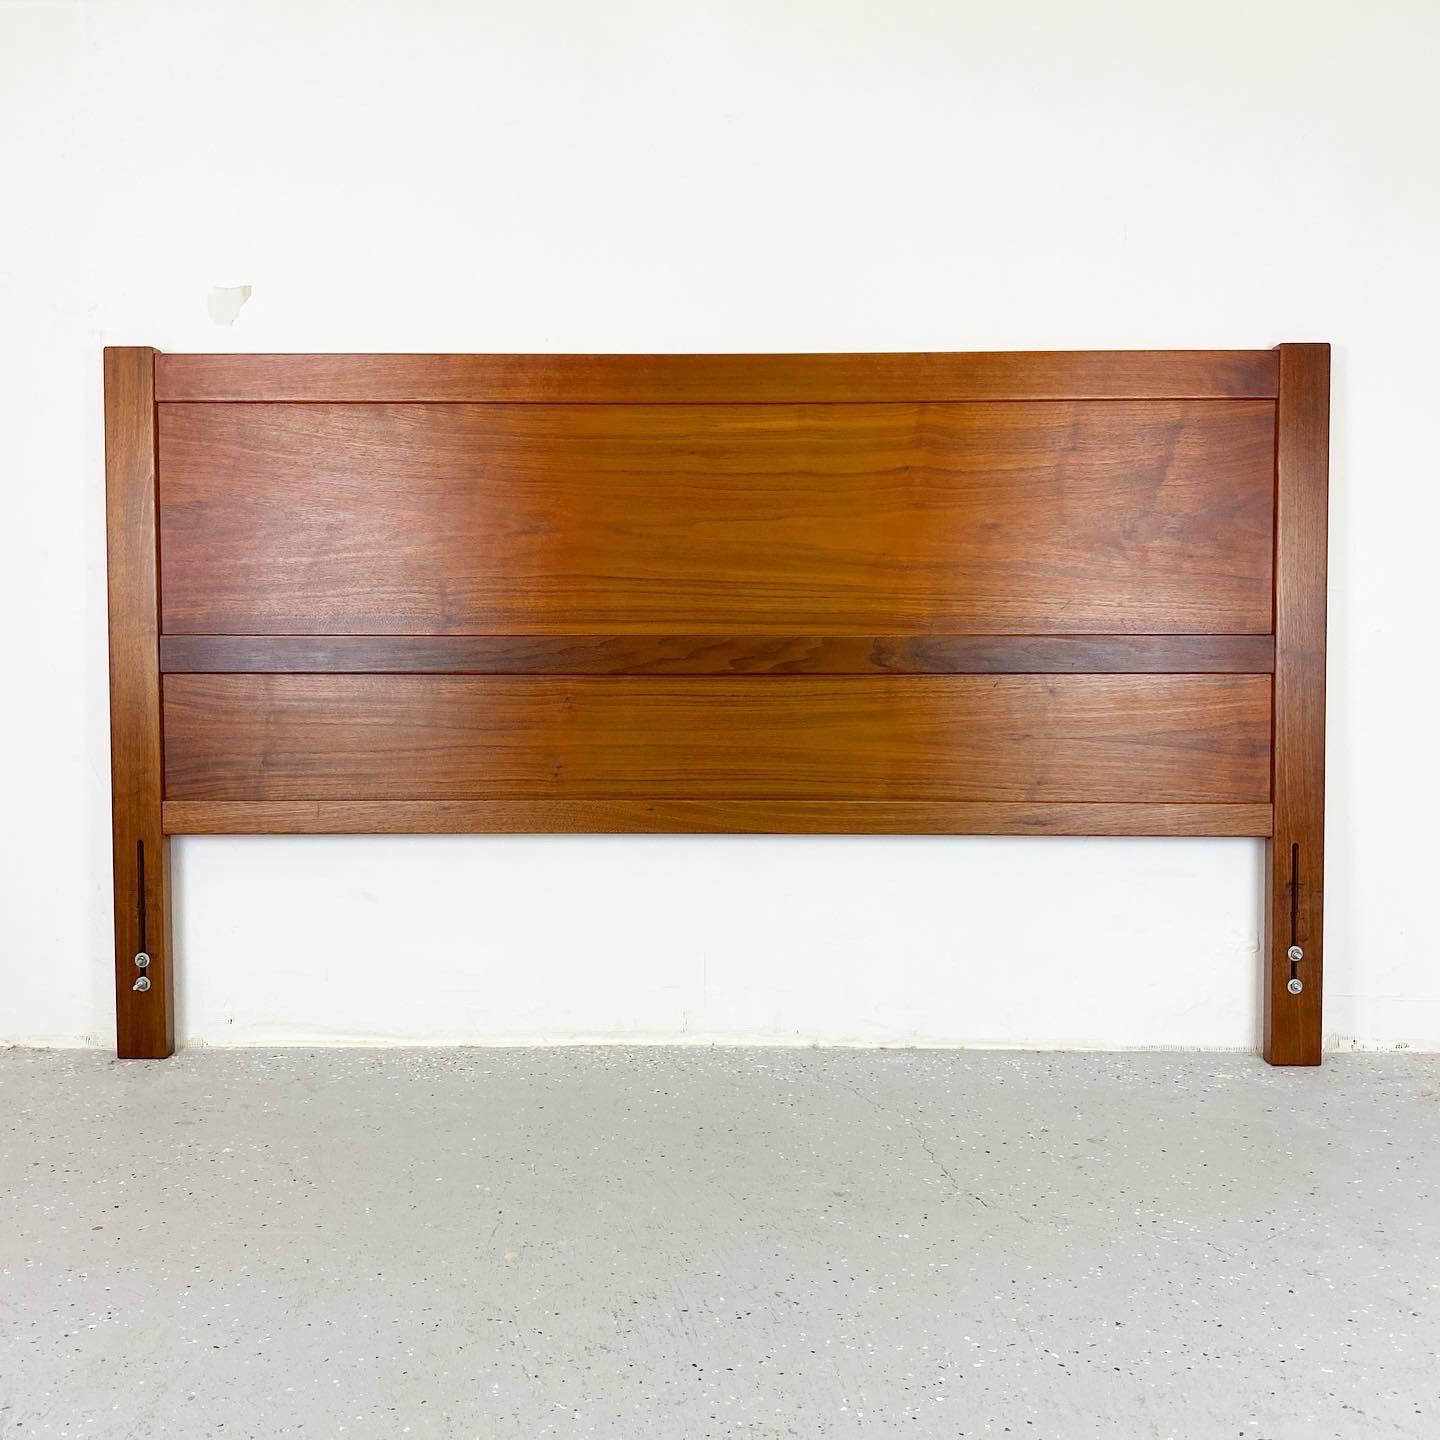 Outstanding teak and cane headboard that is reversible.